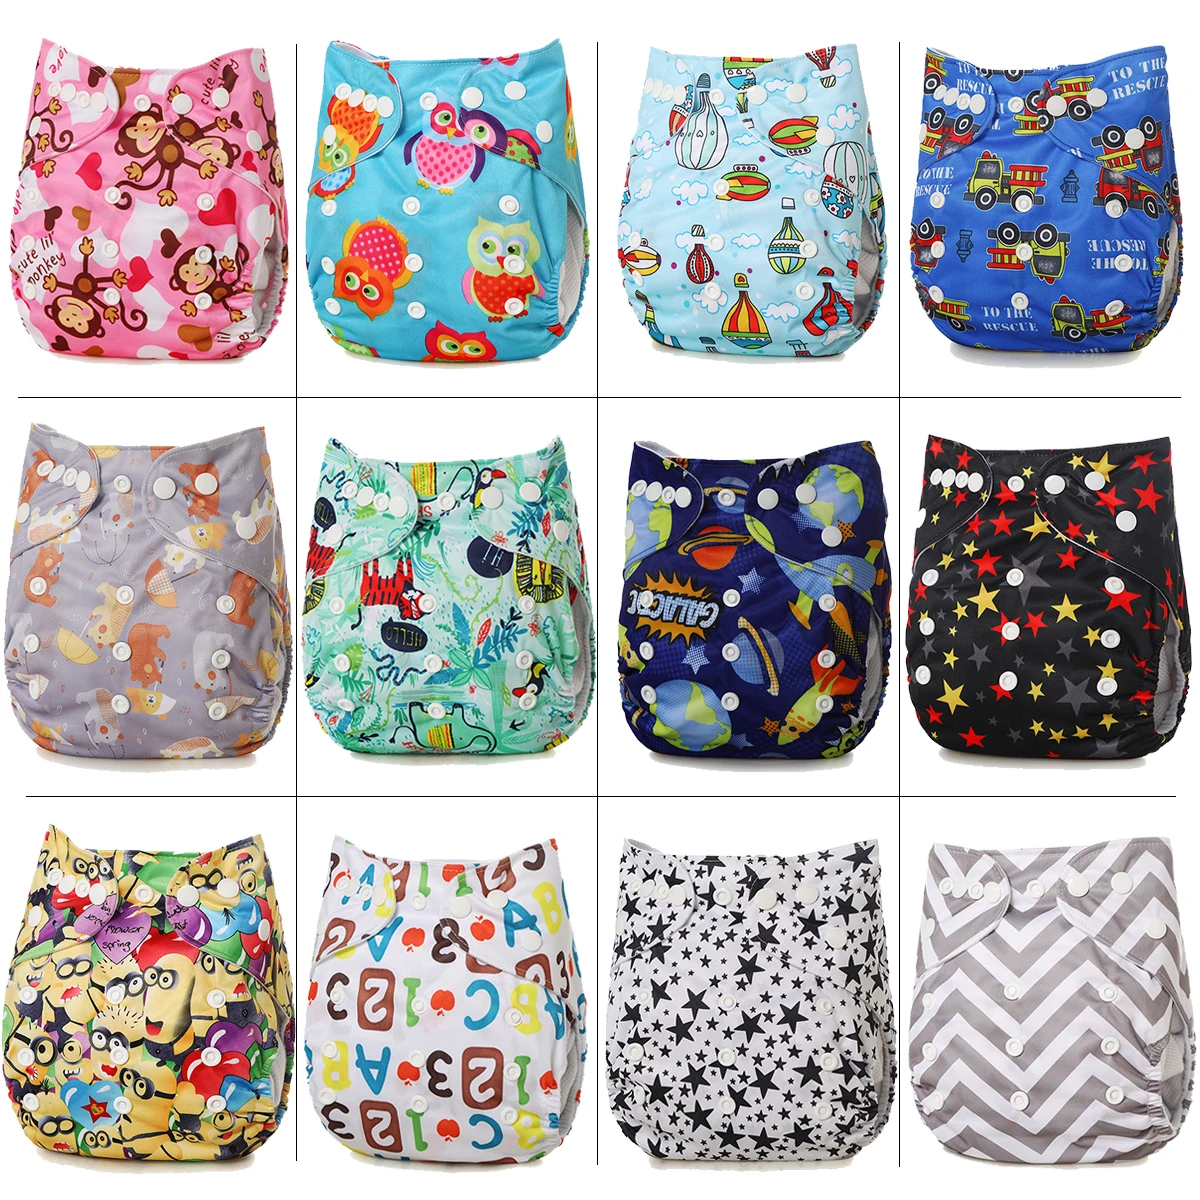 2Pcs Adjustable&Reusable Cloth Diaper - The Perfect Eco-Friendly Solution for Your Baby's Comfort and Saving(GIve an Insert）